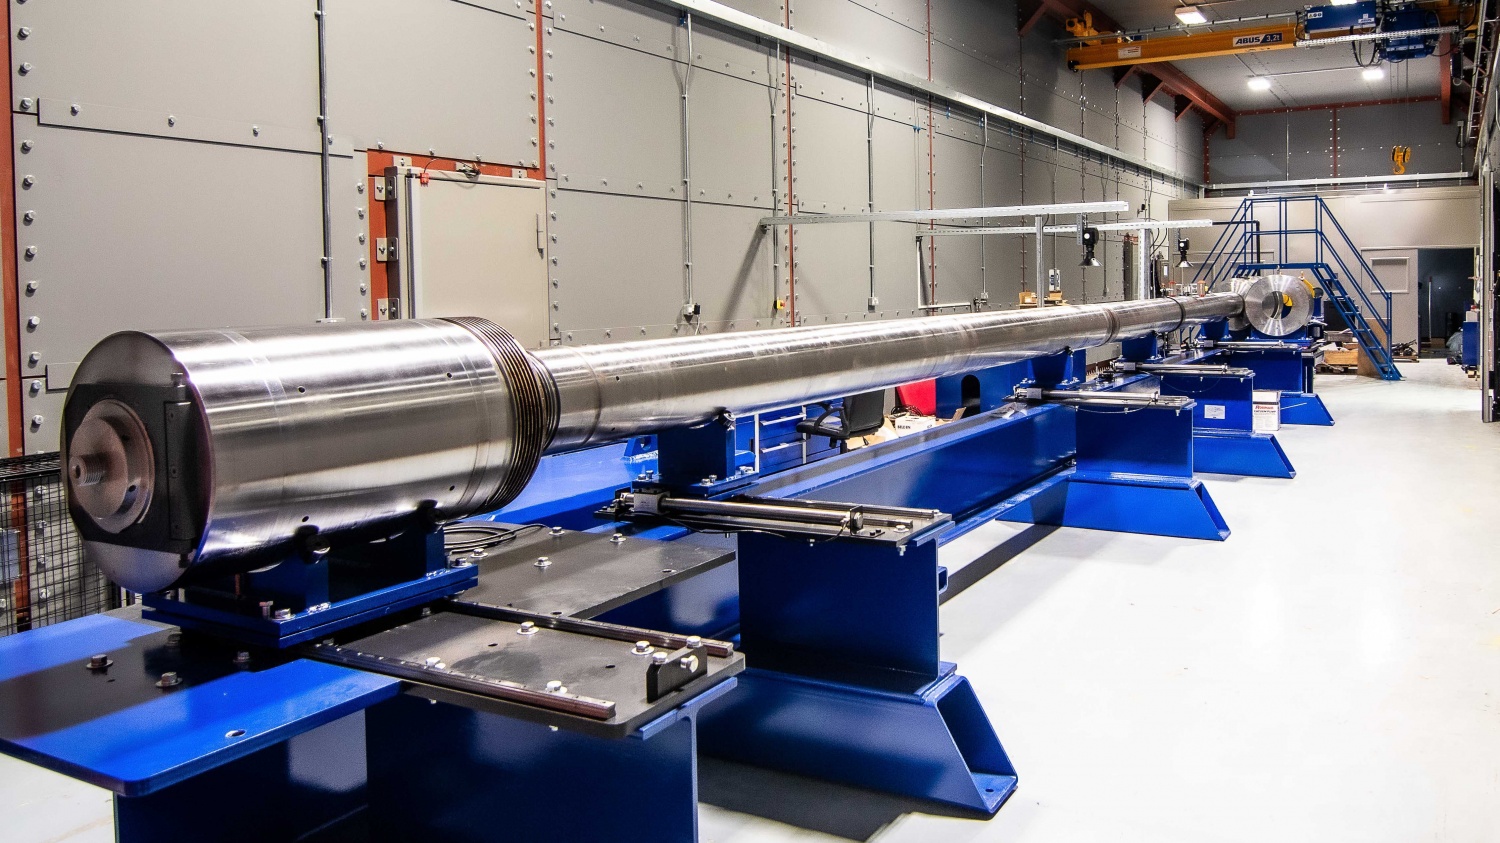 This 70-Foot Nuclear Fusion Gun Aims to Fire a 1-billion-G Projectile to Replicate the Sun's Energy Production